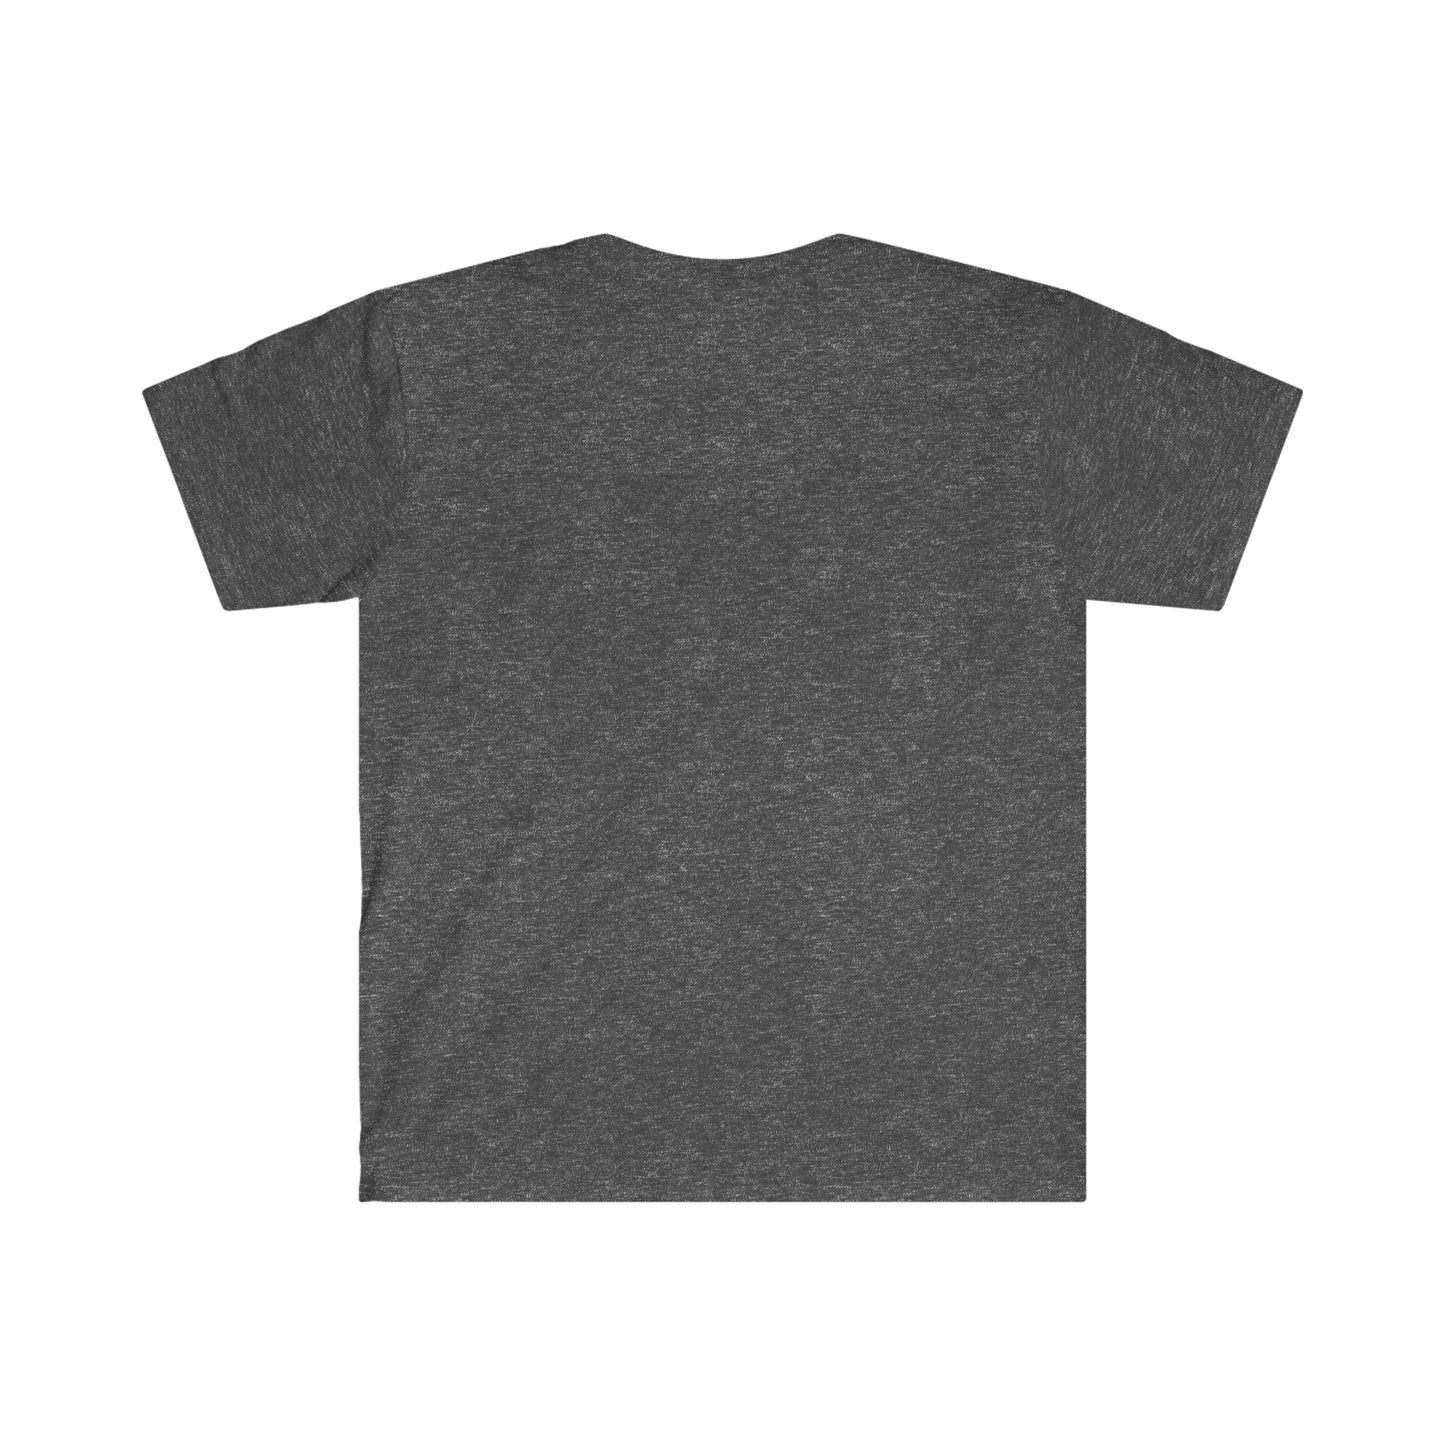 Smooth Rock Falls - Men's Softstyle T-Shirt